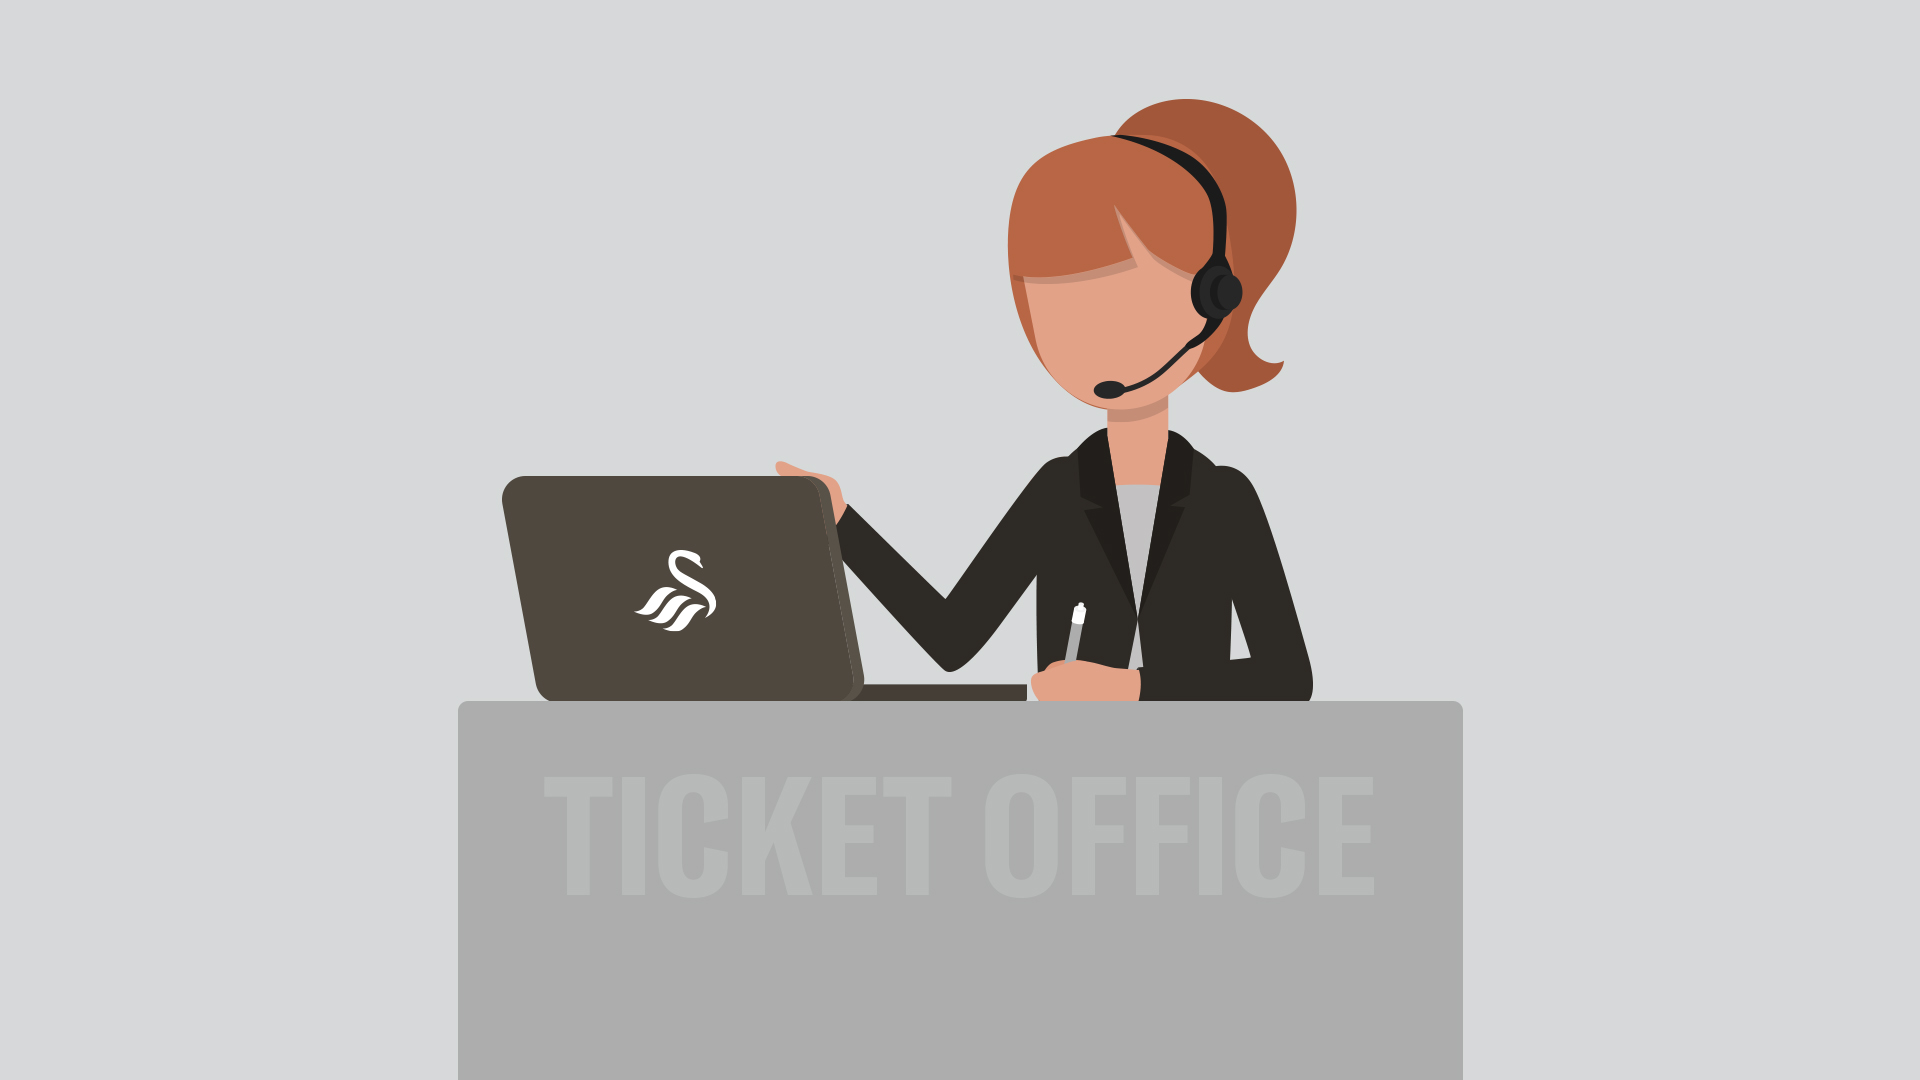 ticketing-webpage-call-ticket-office-23-24